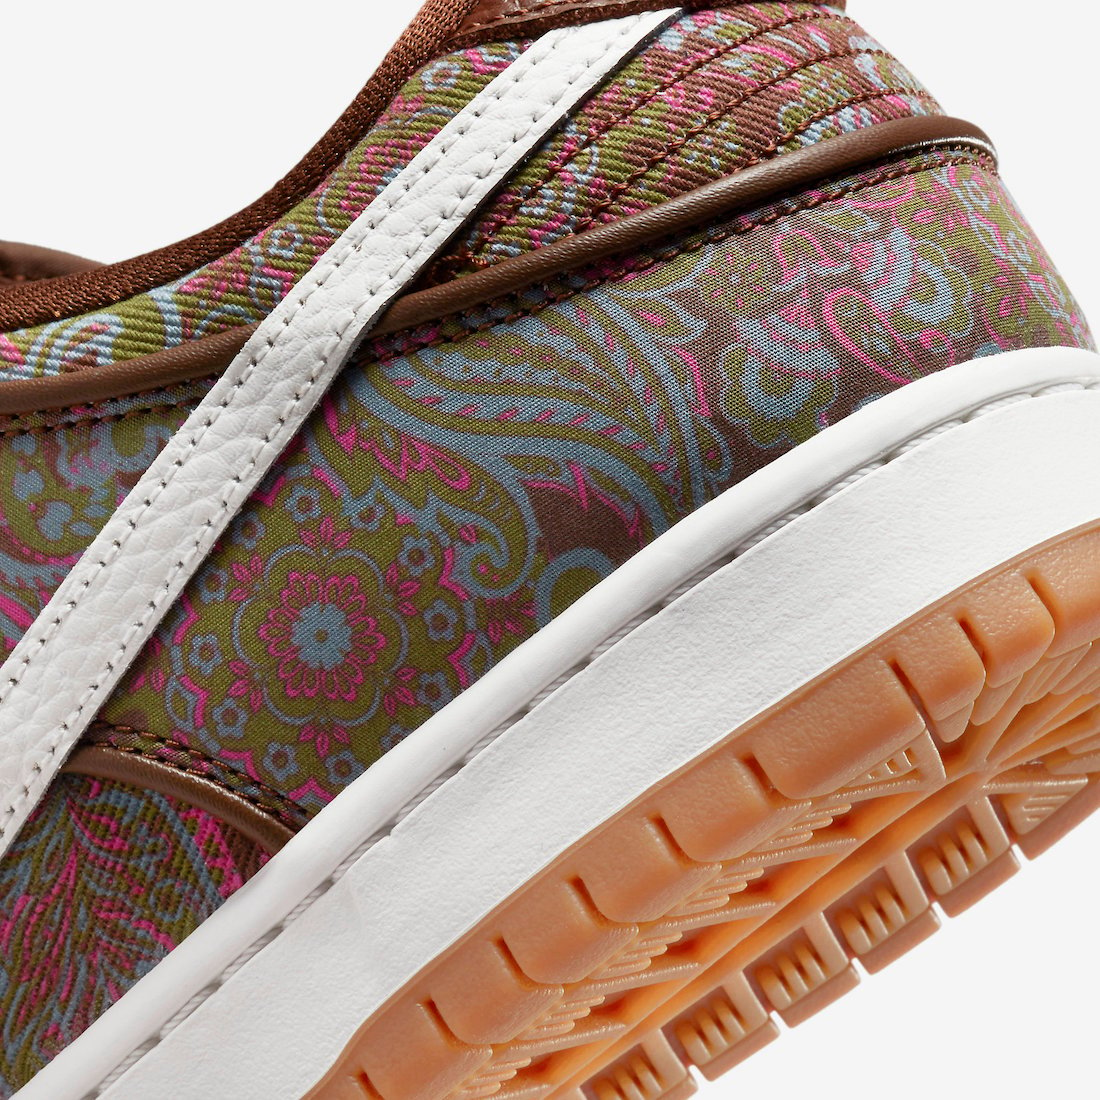 Nike SB Dunk Low Paisley DH7534-200 Release Info Price